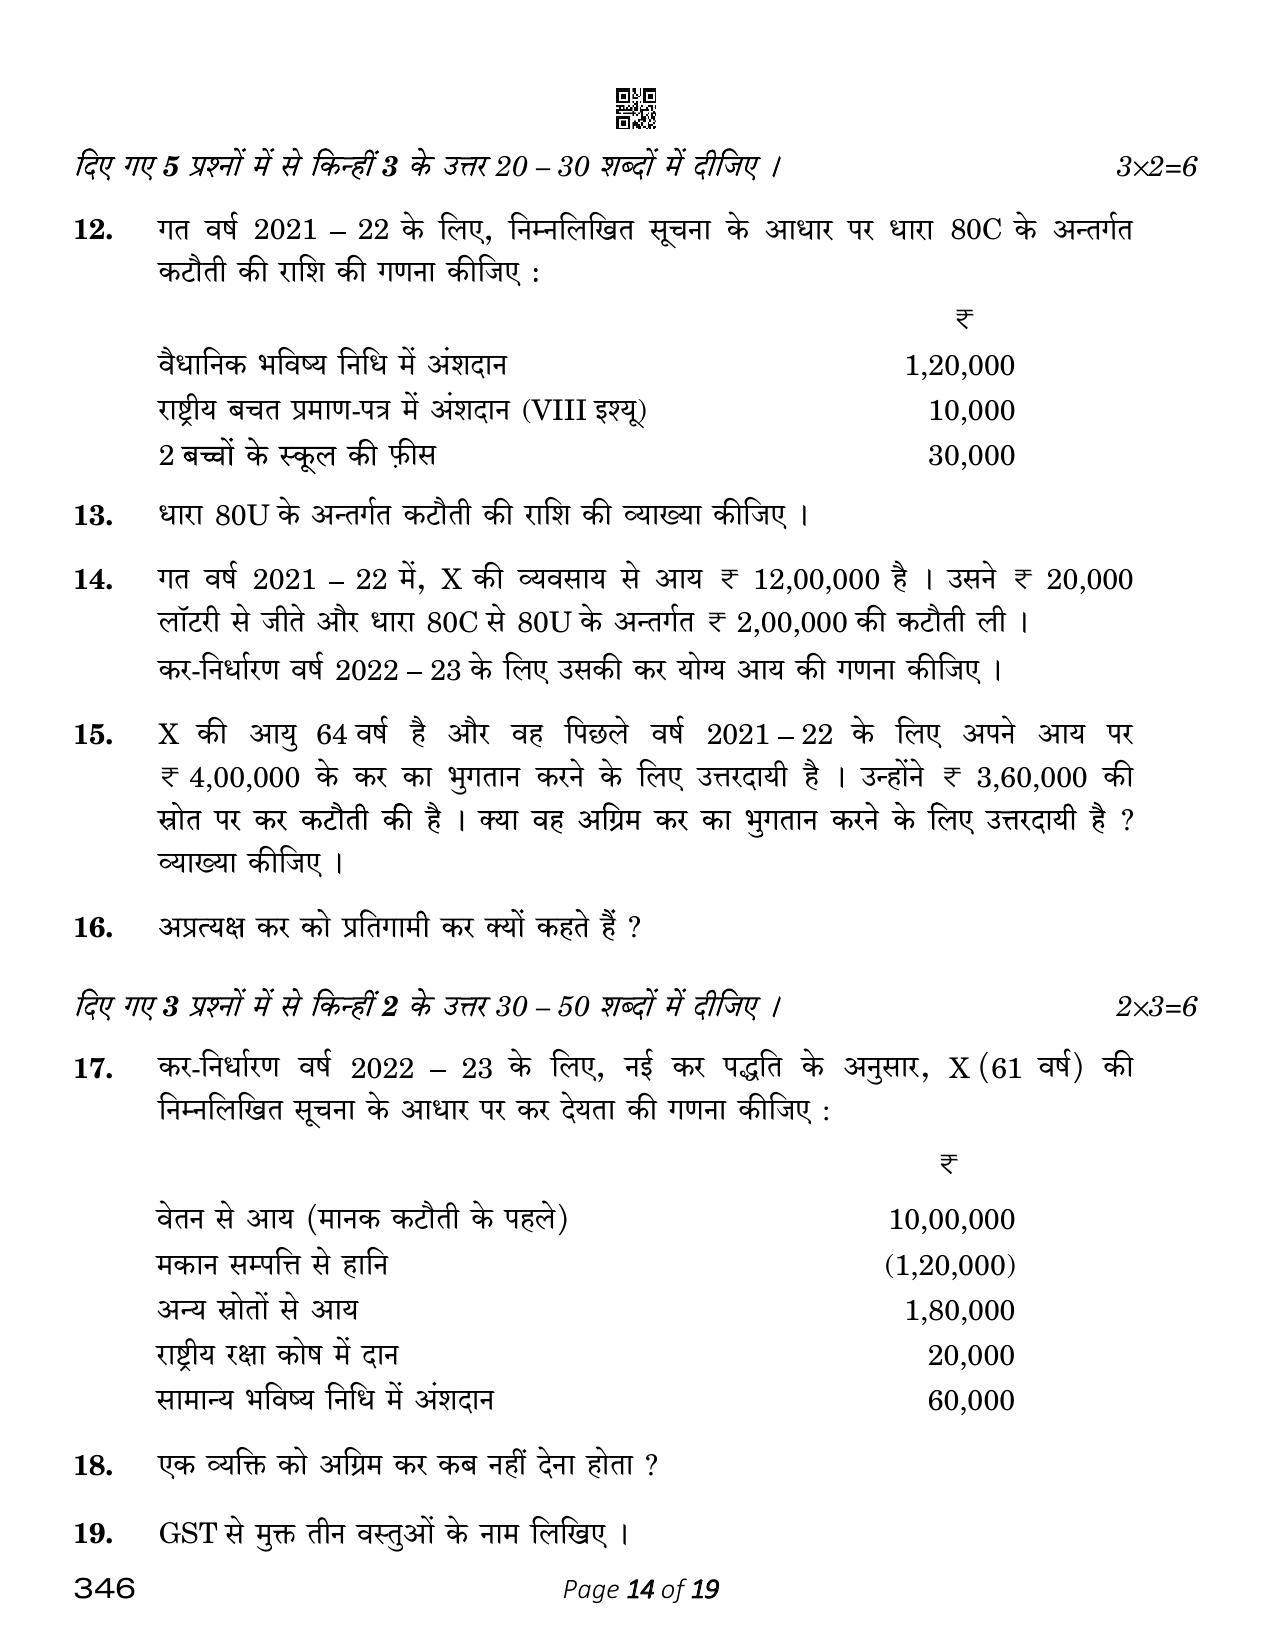 CBSE Class 12 Taxation (Compartment) 2023 Question Paper - Page 14